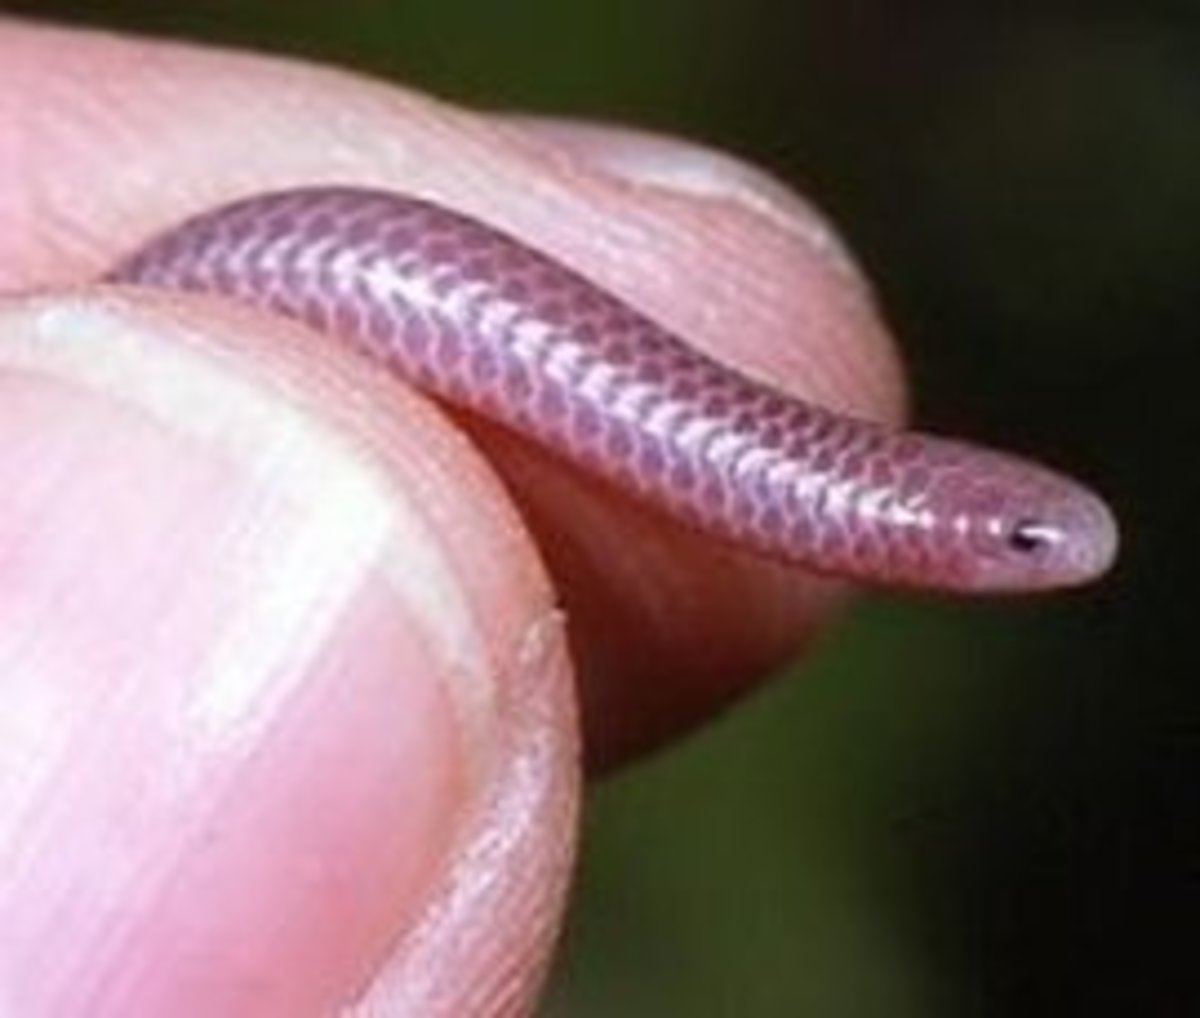 Smallest snake in the world: The four-inches long Barbados Threadsnake (leptotyphlops carlae)